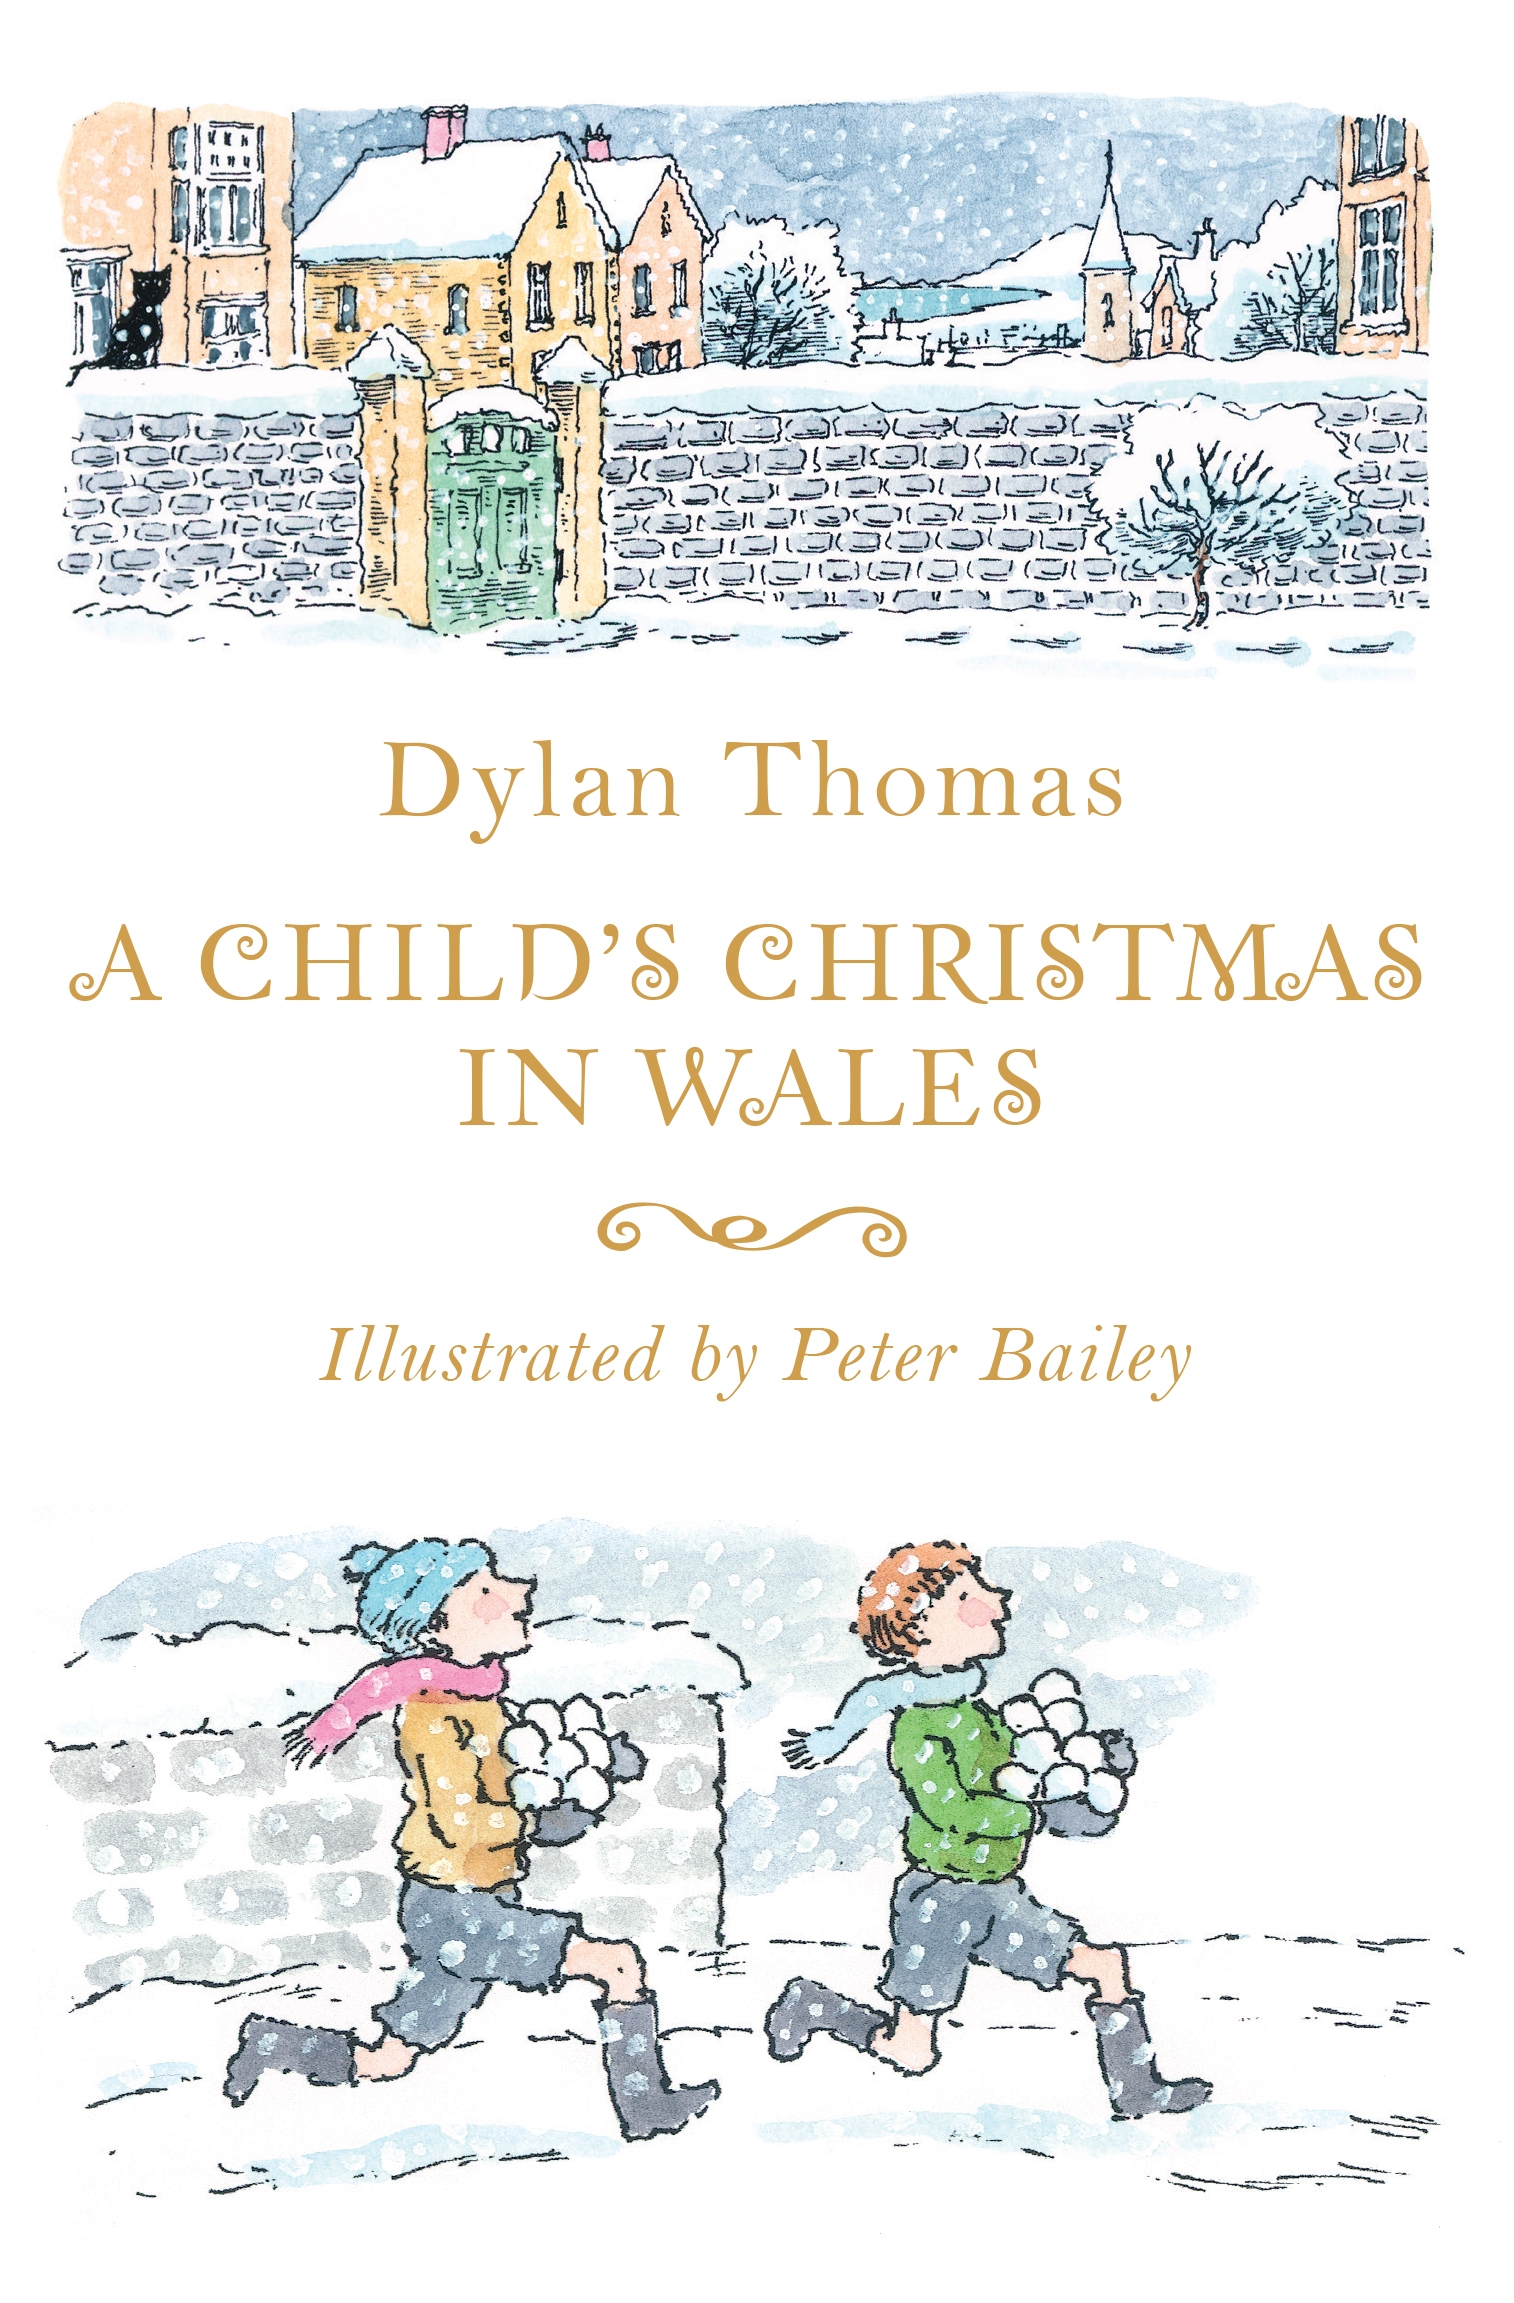 A Child's Christmas In Wales PDF Free Download